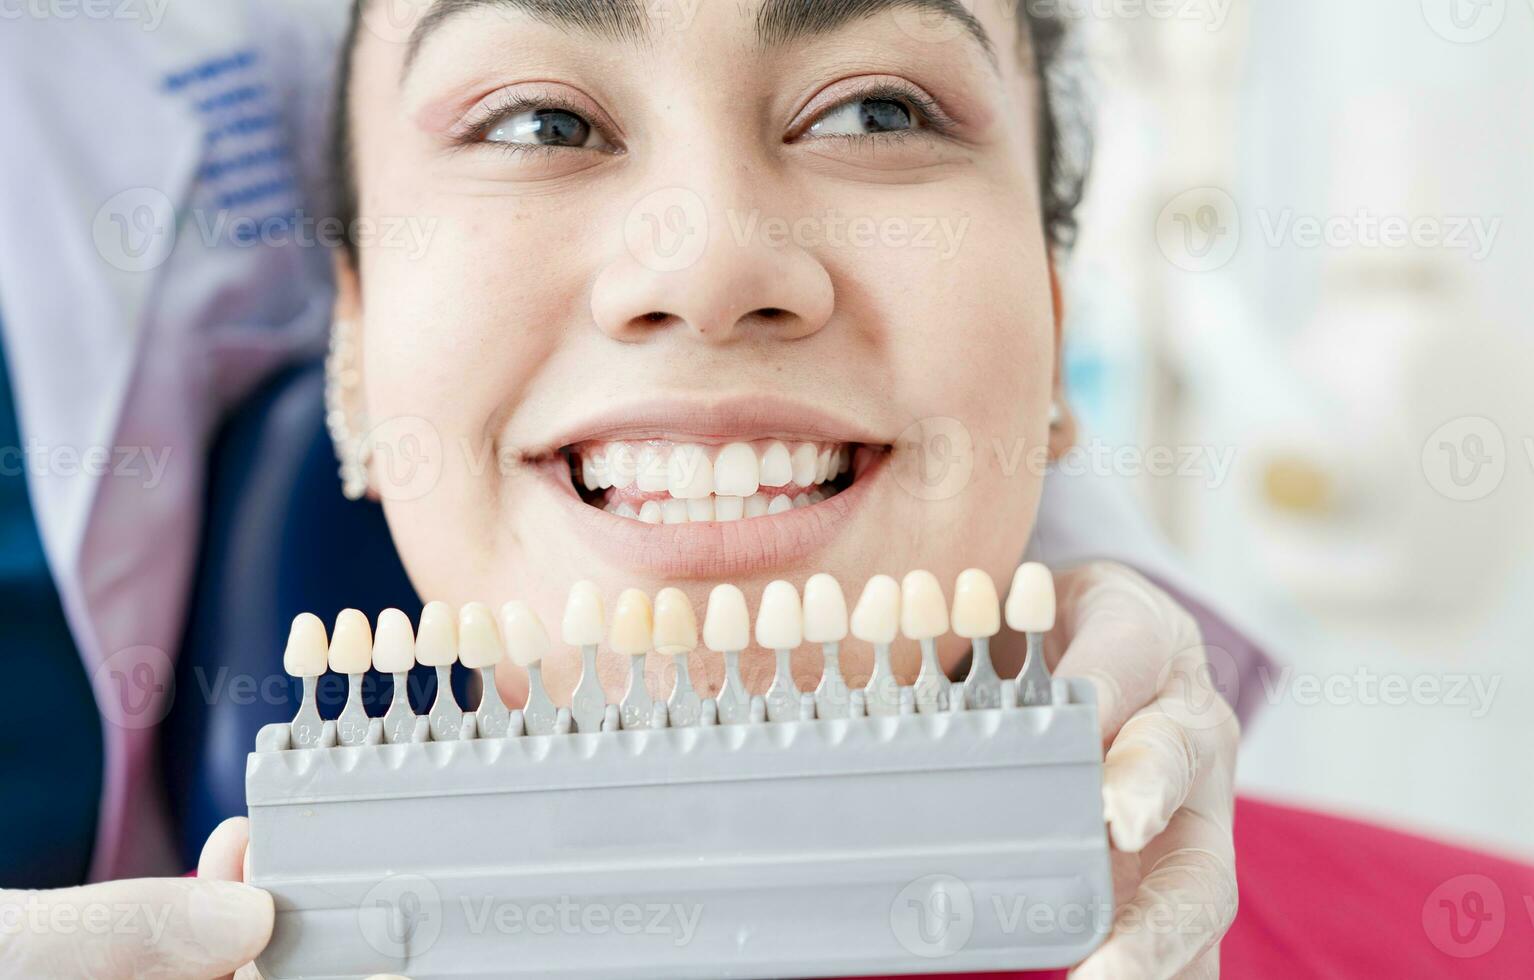 Dentist holding a set of implants with various shades of tone. Patient selecting the shade of dental implant. Implant tooth shade selection, Dentist showing dental prosthesis shades to patient photo